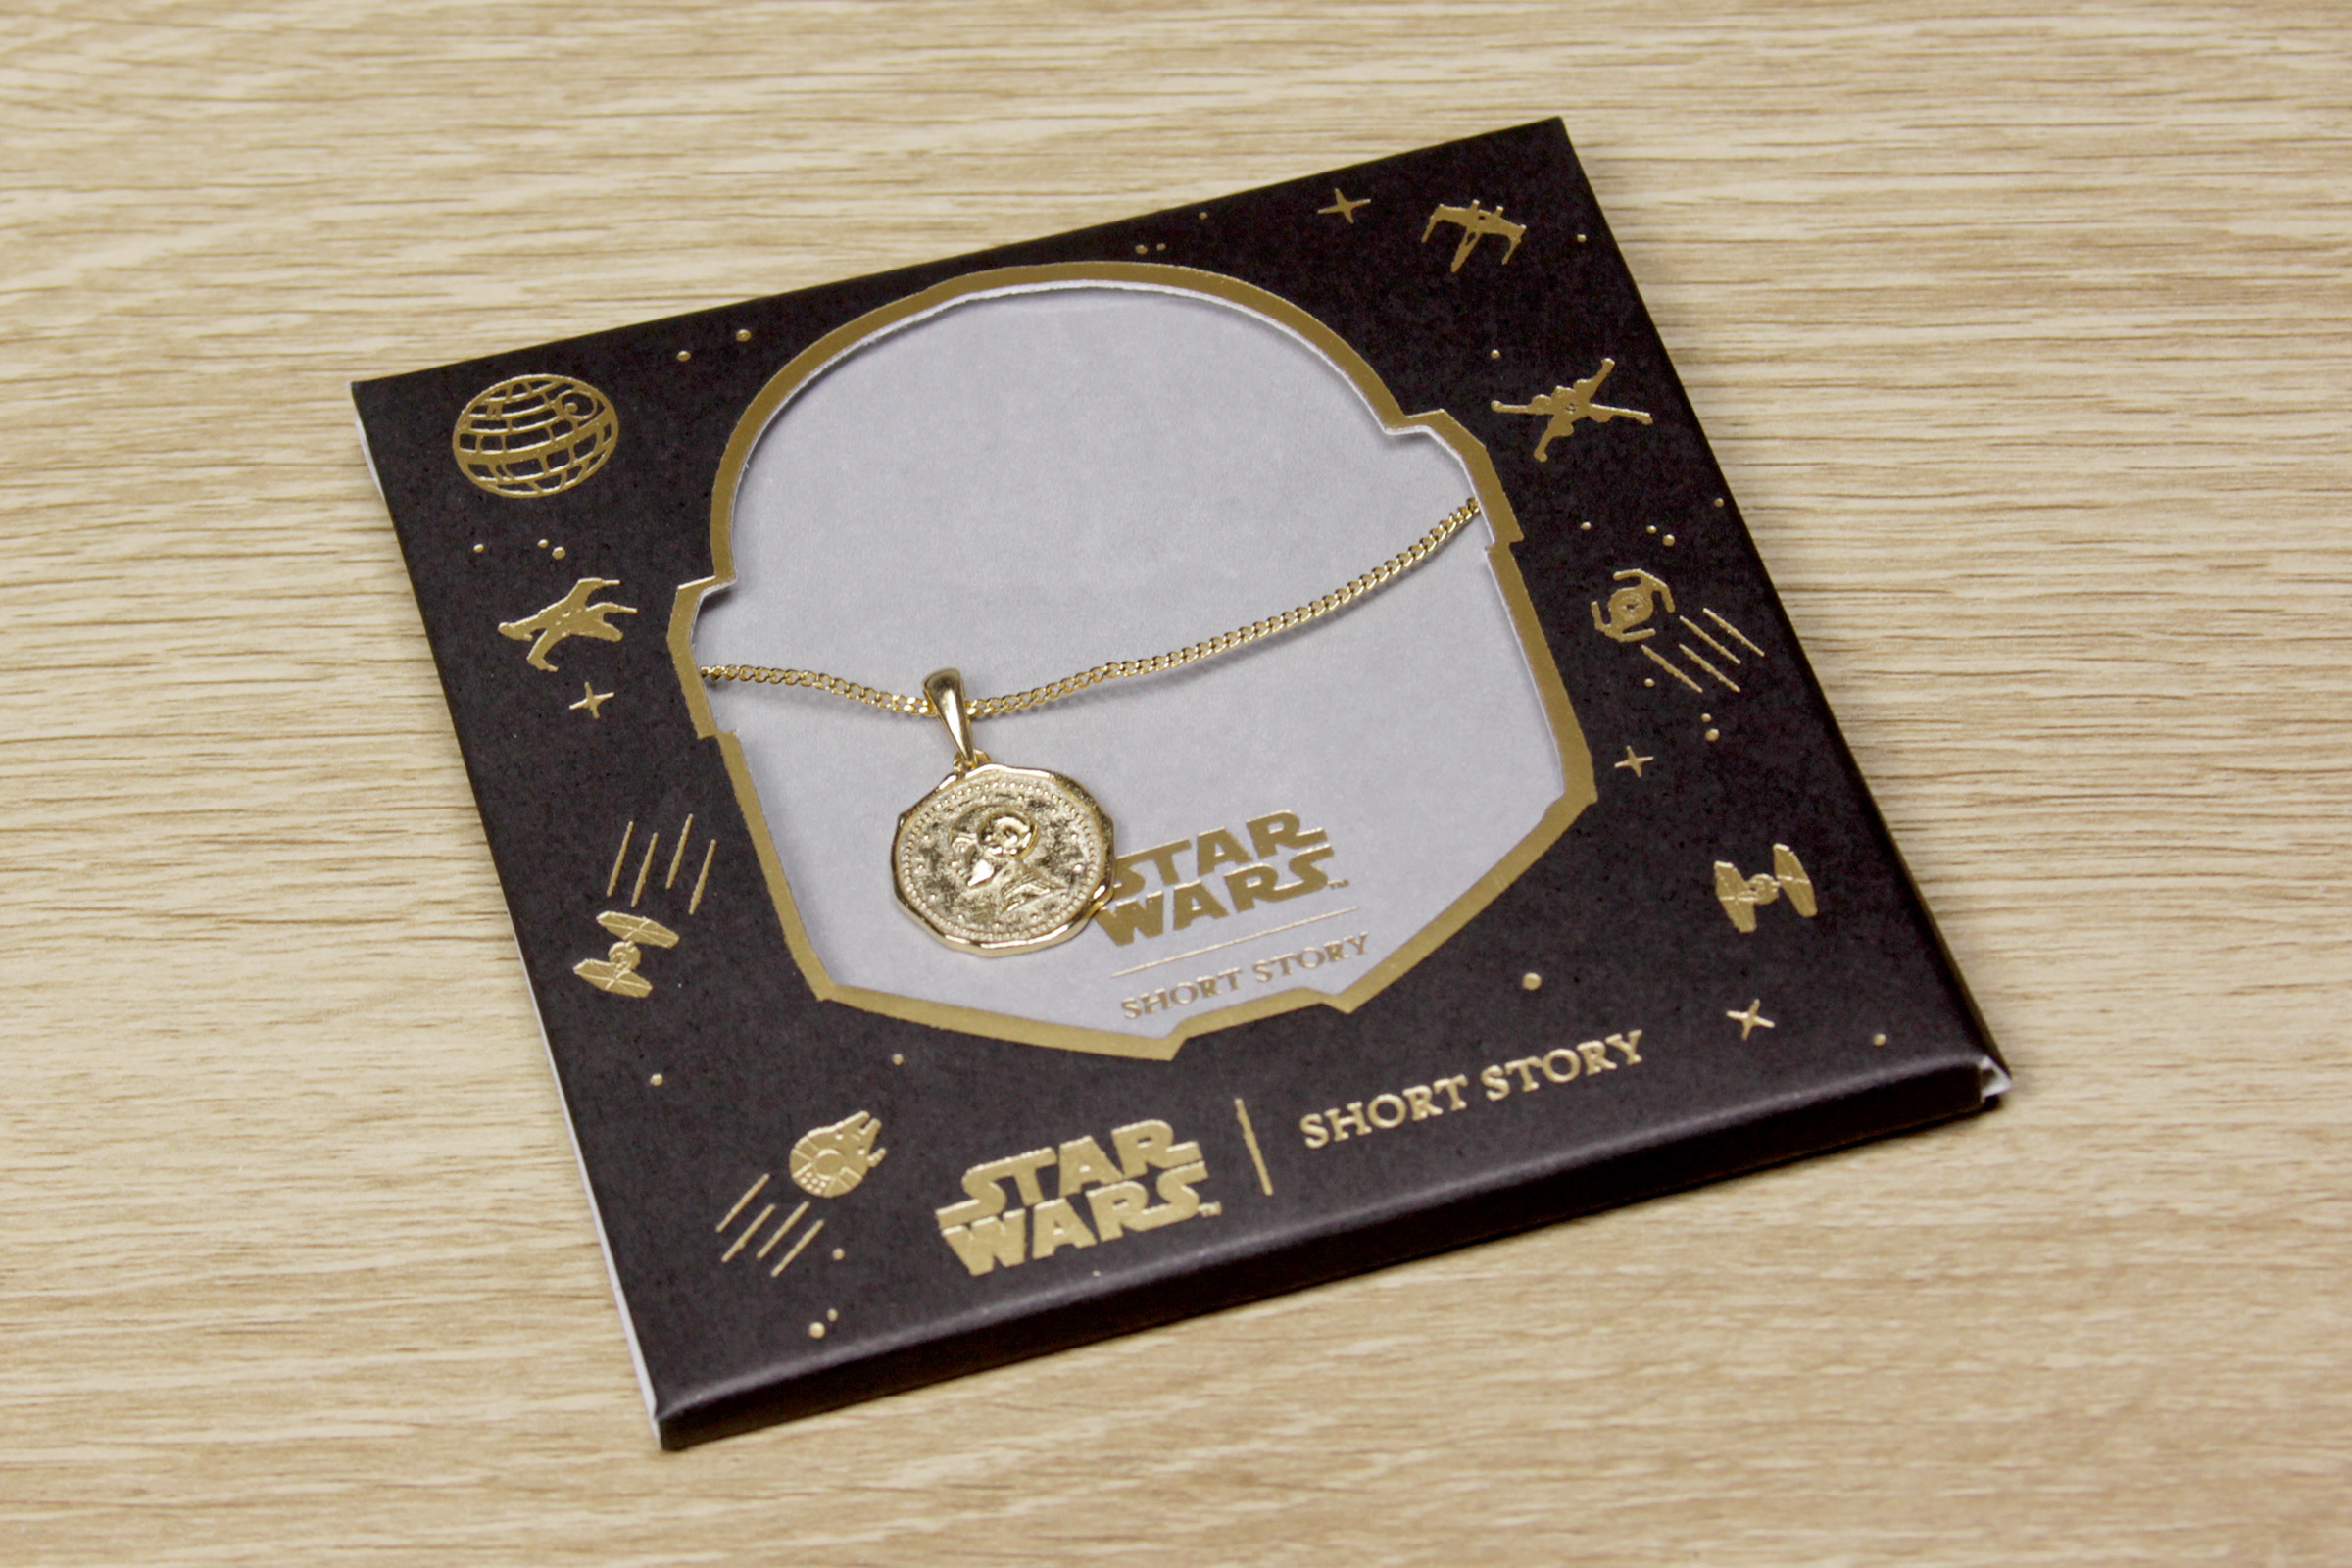 Short Story x Star Wars - Packaged Necklace